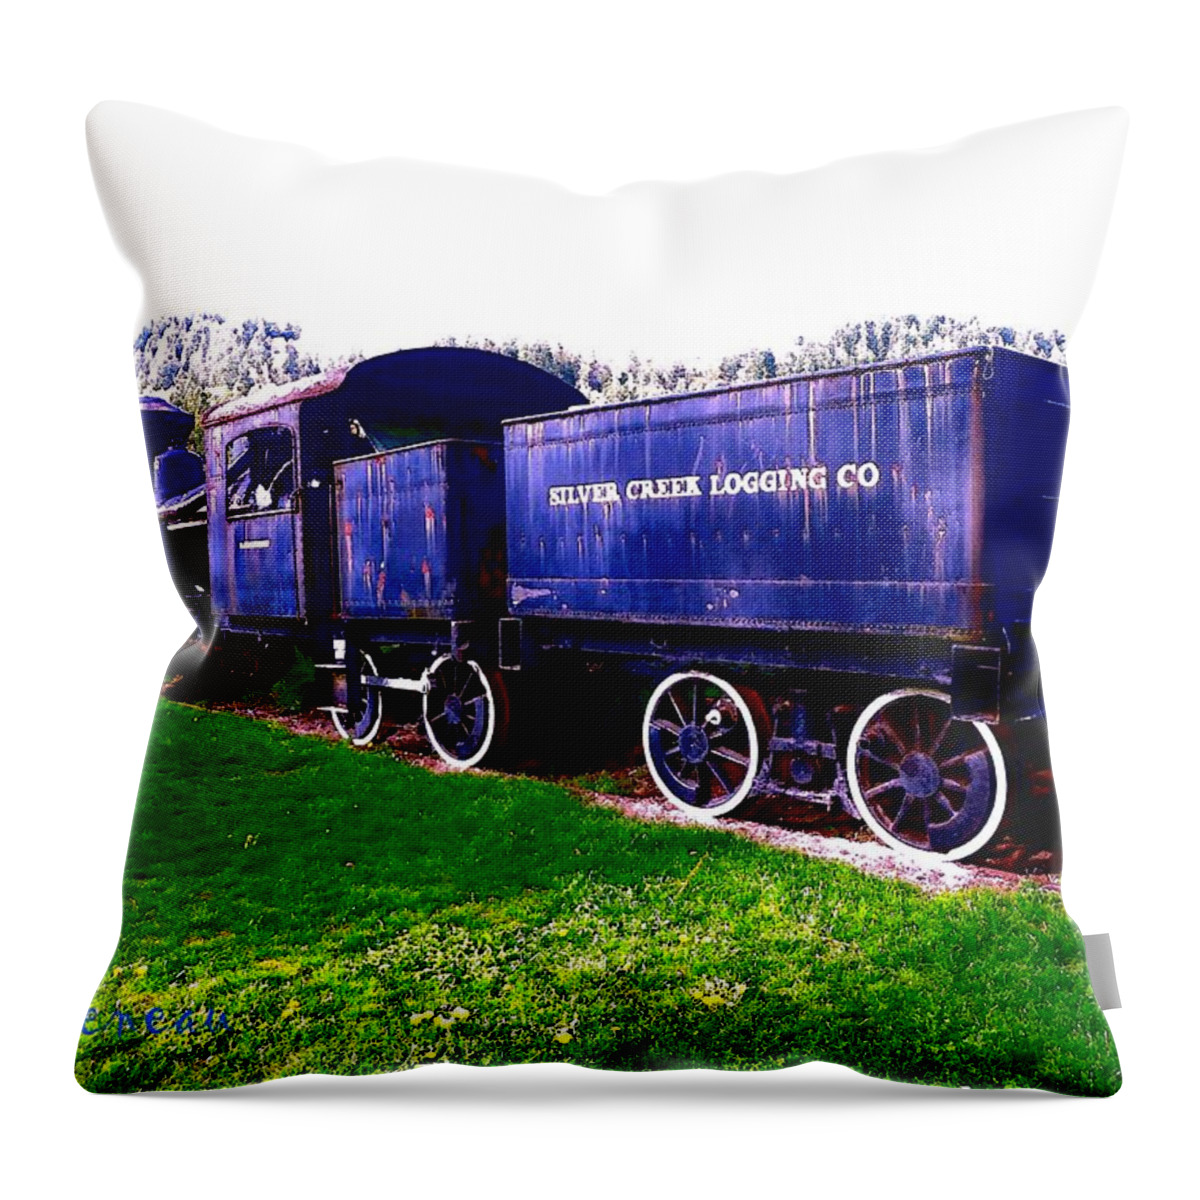 Locomotives Throw Pillow featuring the photograph Locomotive Steam Engine by A L Sadie Reneau